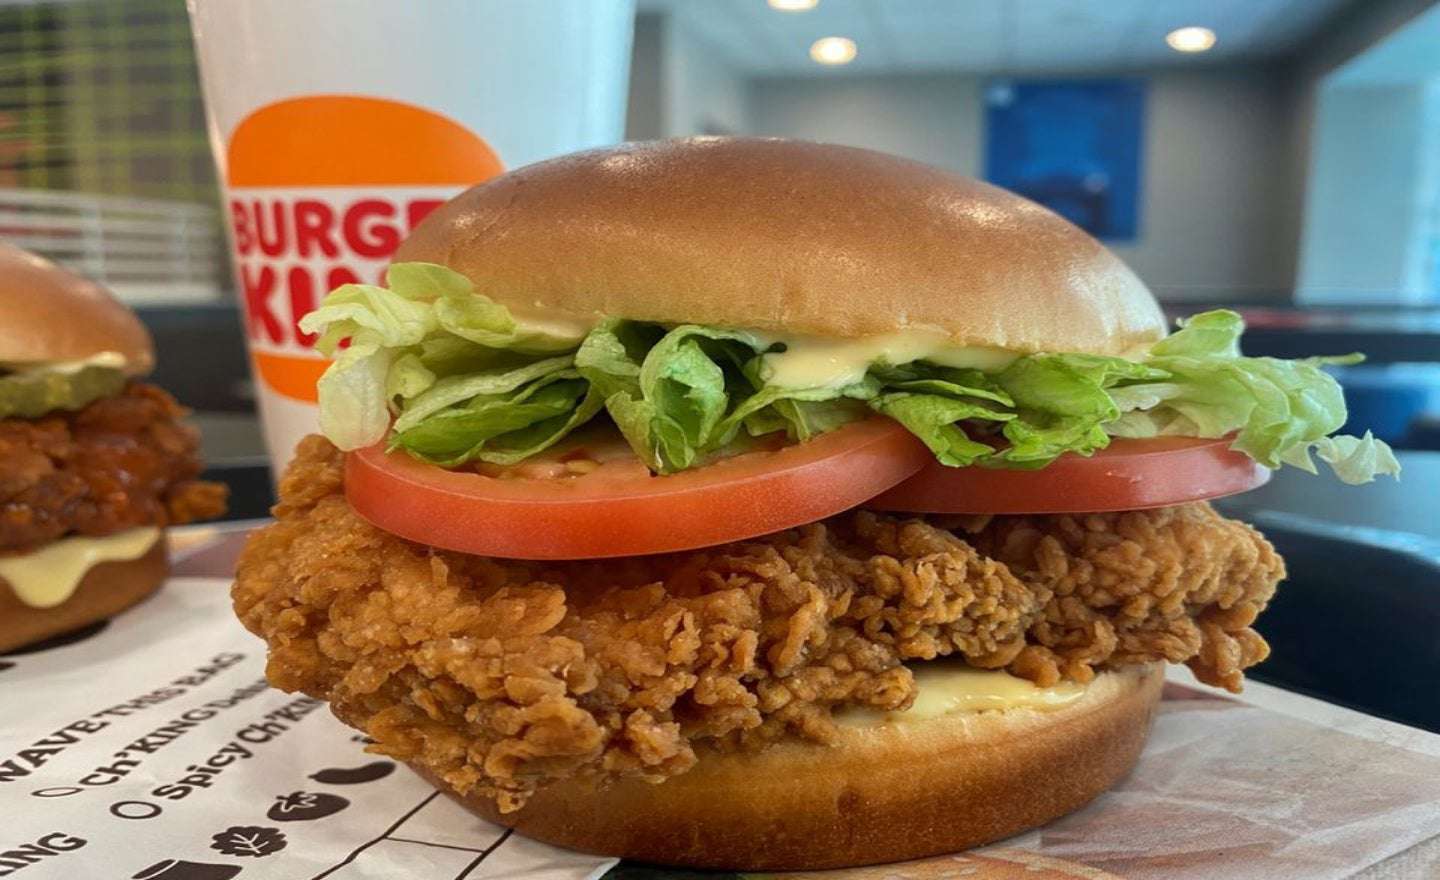 image for Burger King declares war on Chick-fil-A over LGBTQ+ rights and chicken sandwiches